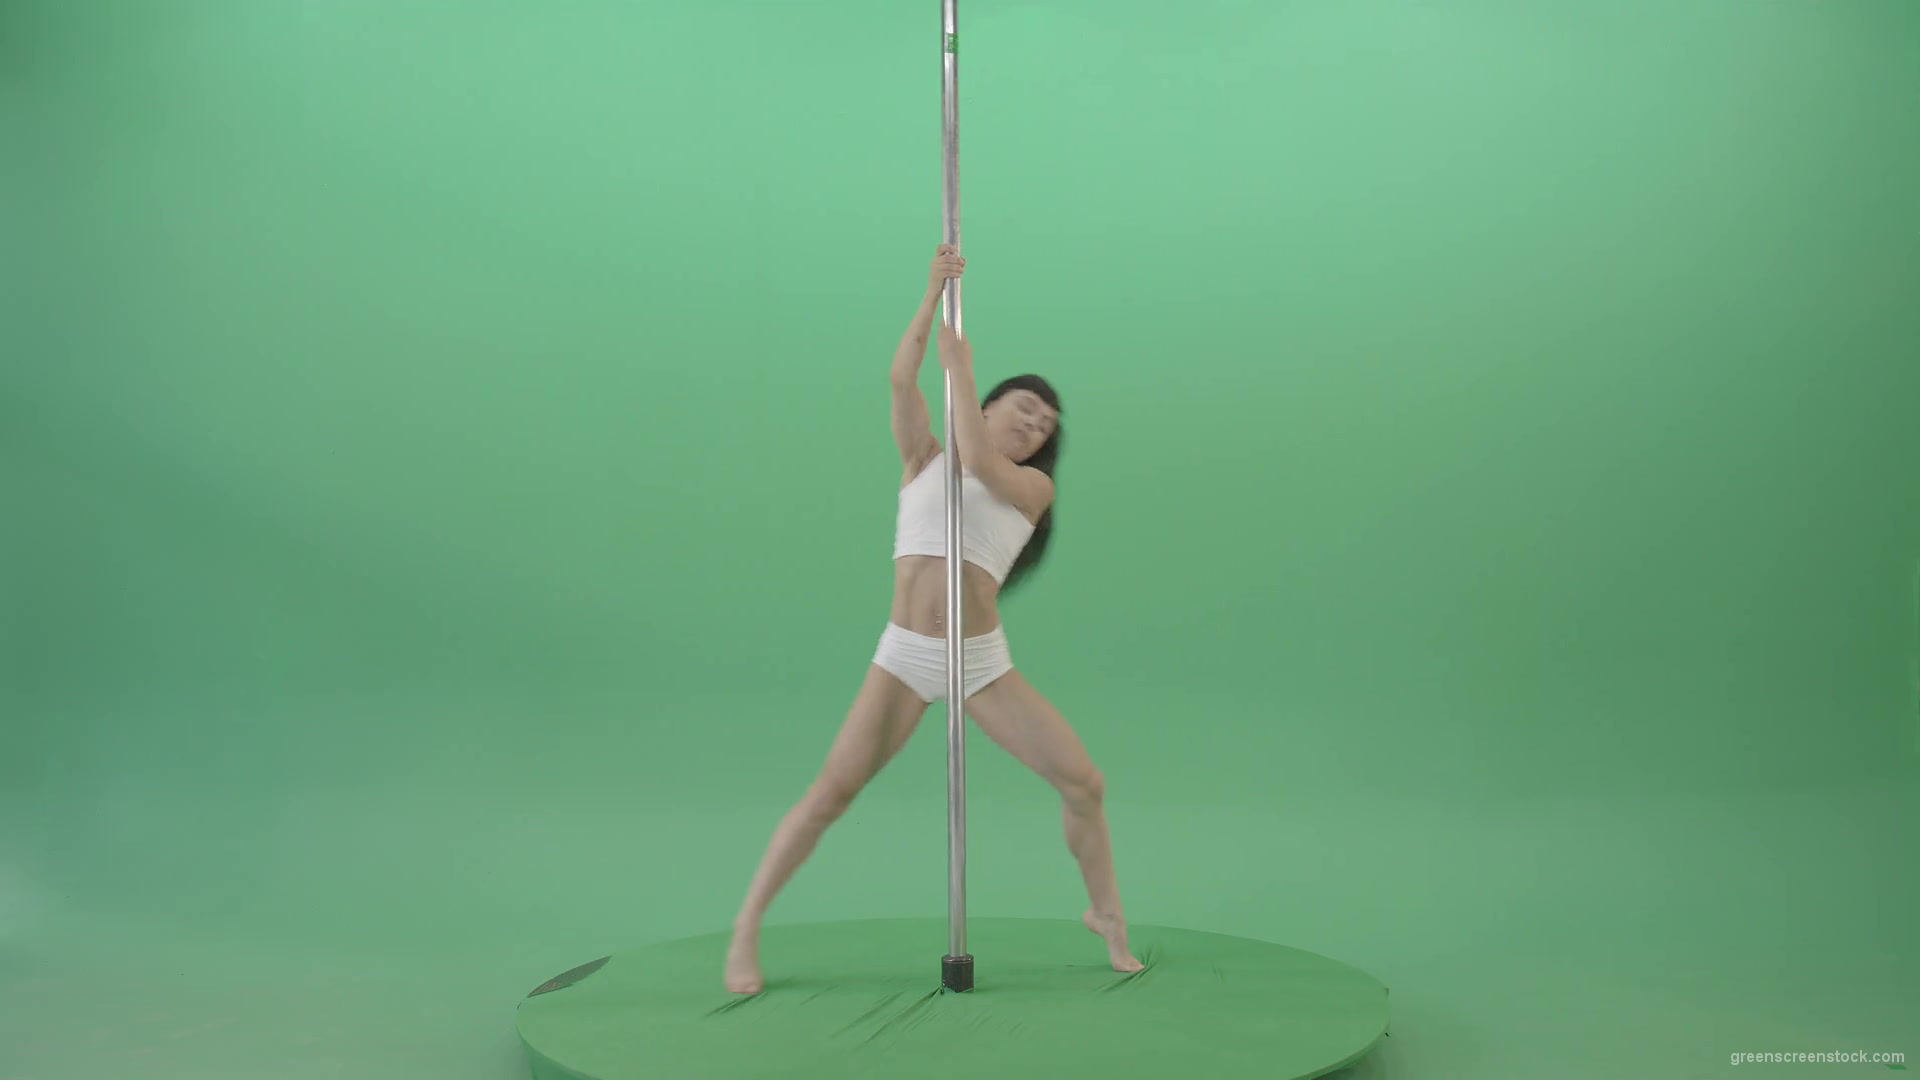 Sport-Fit-Girl-spinning-on-pole-making-acrobatic-element-on-green-screen-1920_009 Green Screen Stock